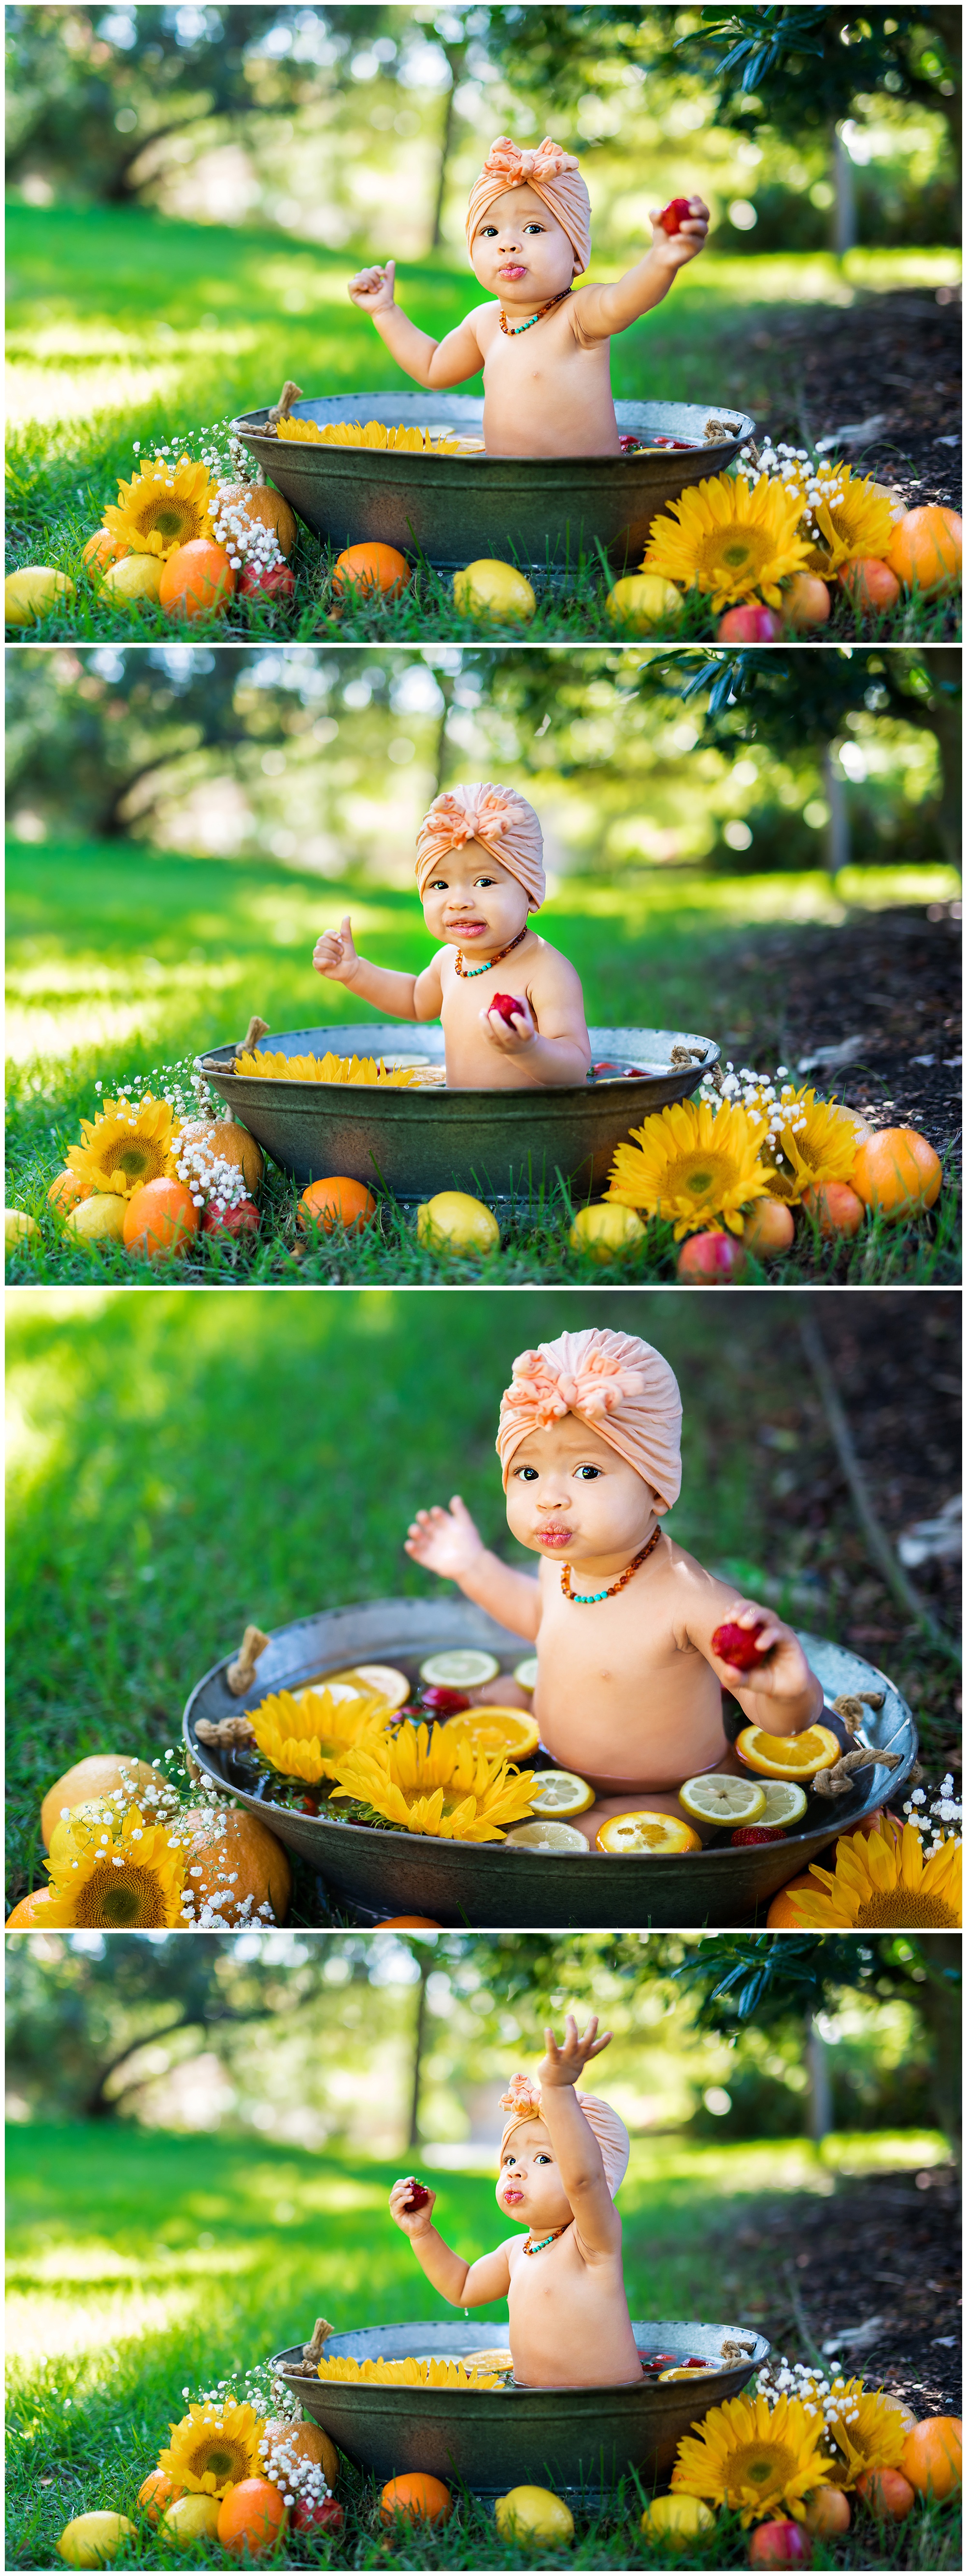 six month old sitting in a bucket of fruit in a field